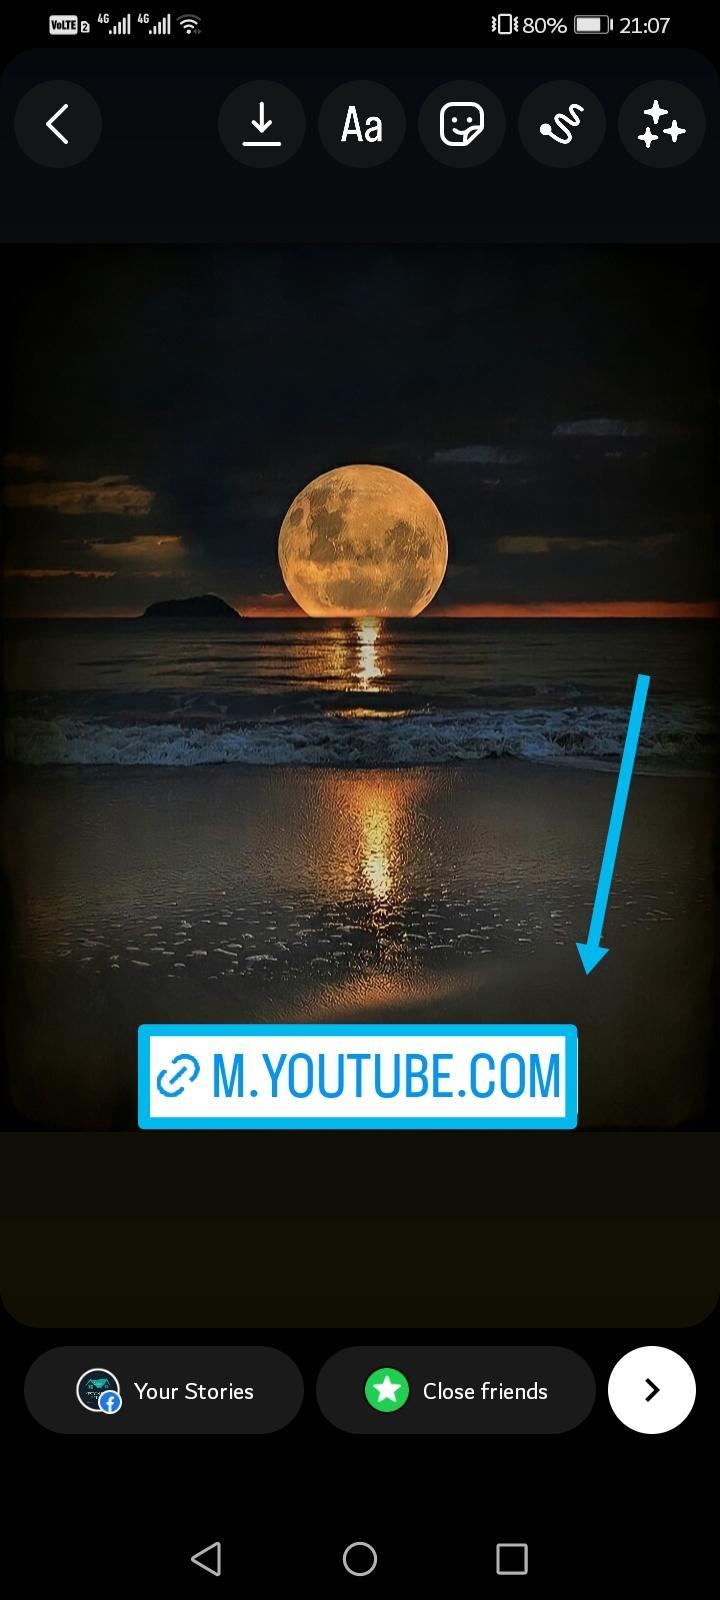 How to Share a YouTube Video on Instagram - adding YouTube link on Instagram 4